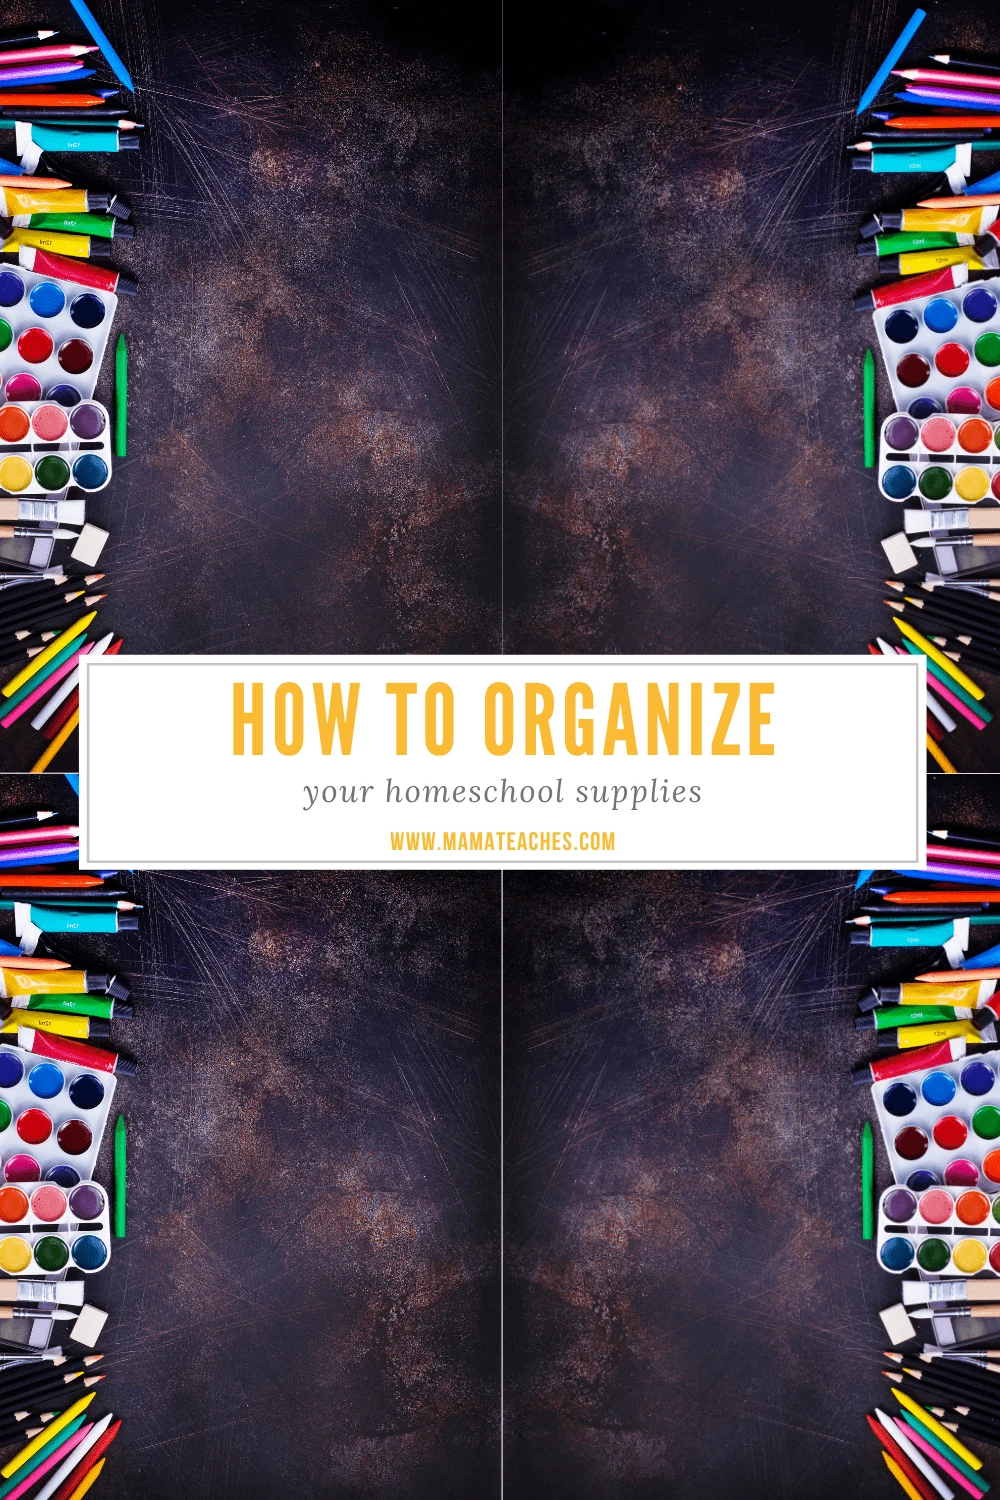 How to Organize Your Homeschool Supplies